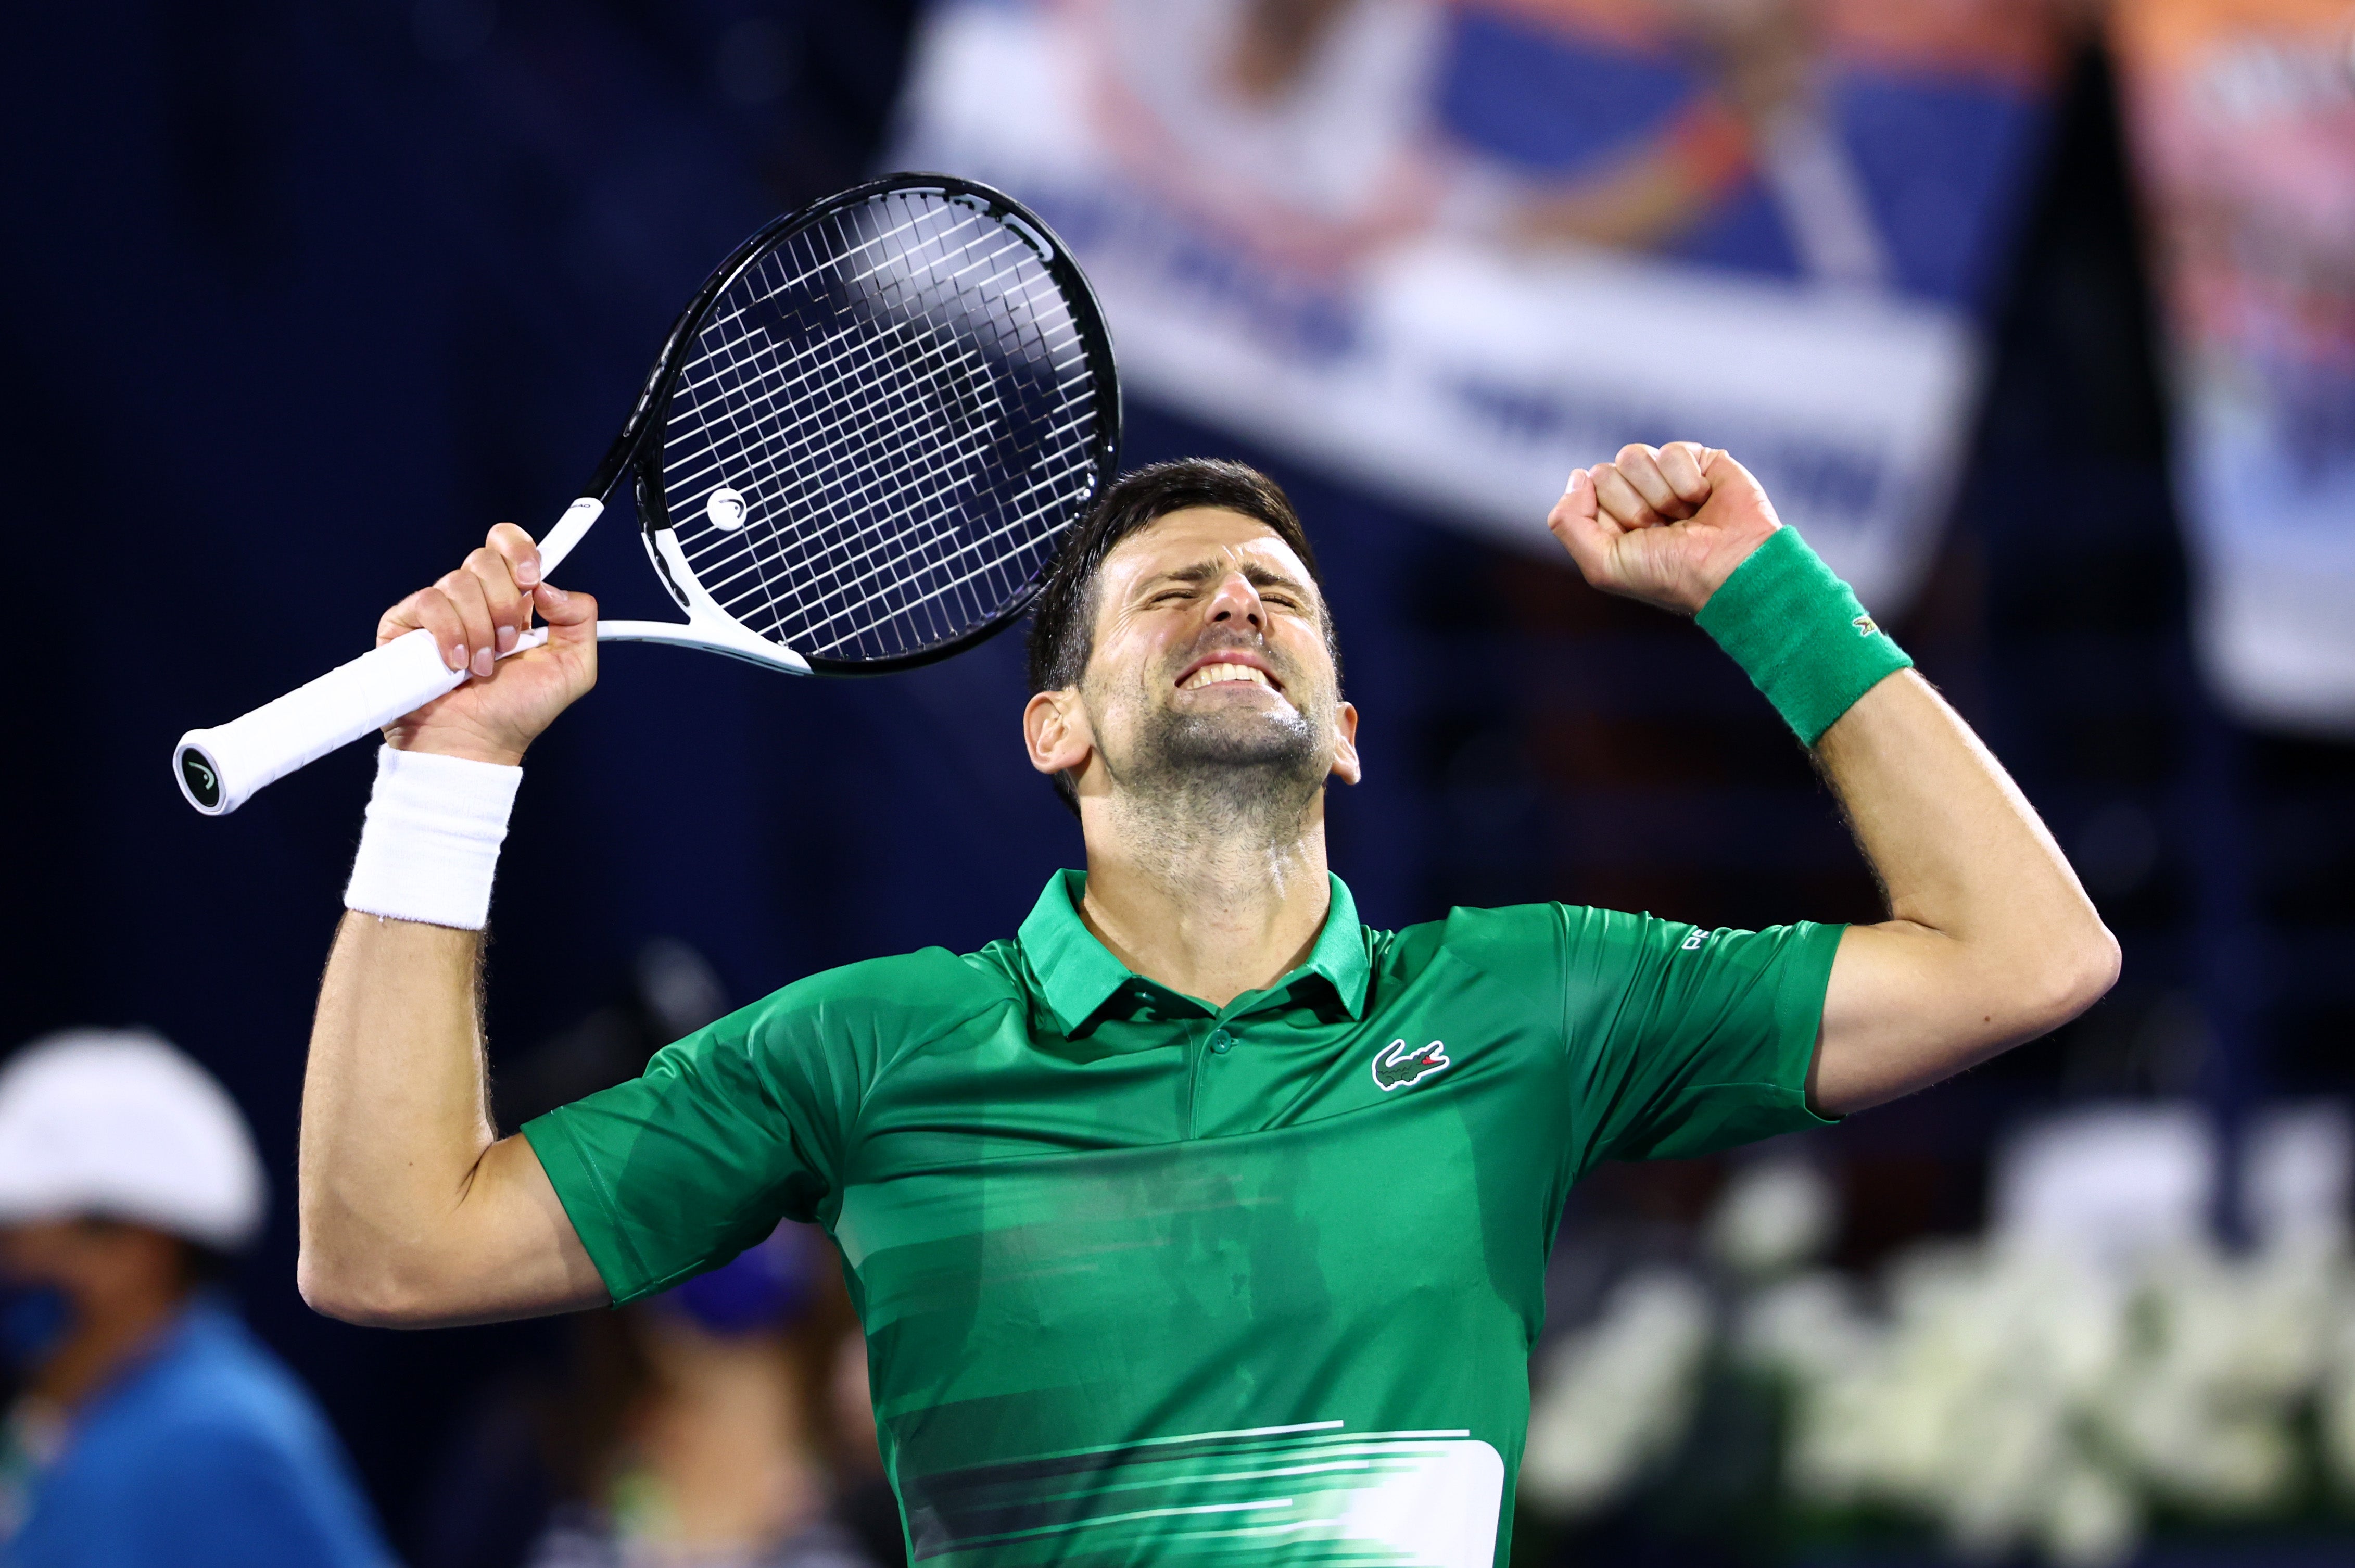 Djokovic won his first match of 2022 on Tuesday